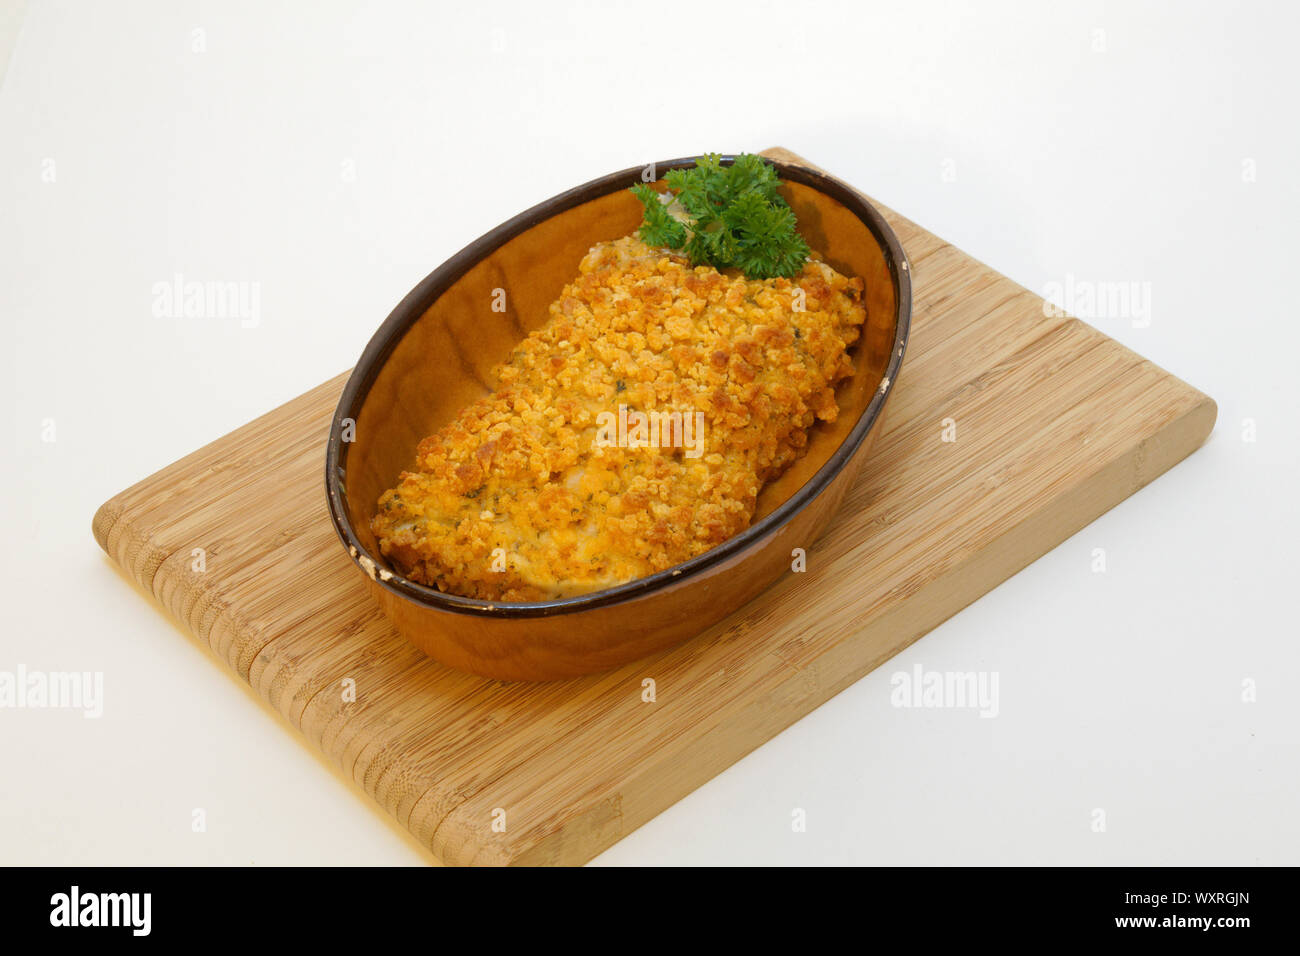 Saithe fish fillet with herb crust Stock Photo